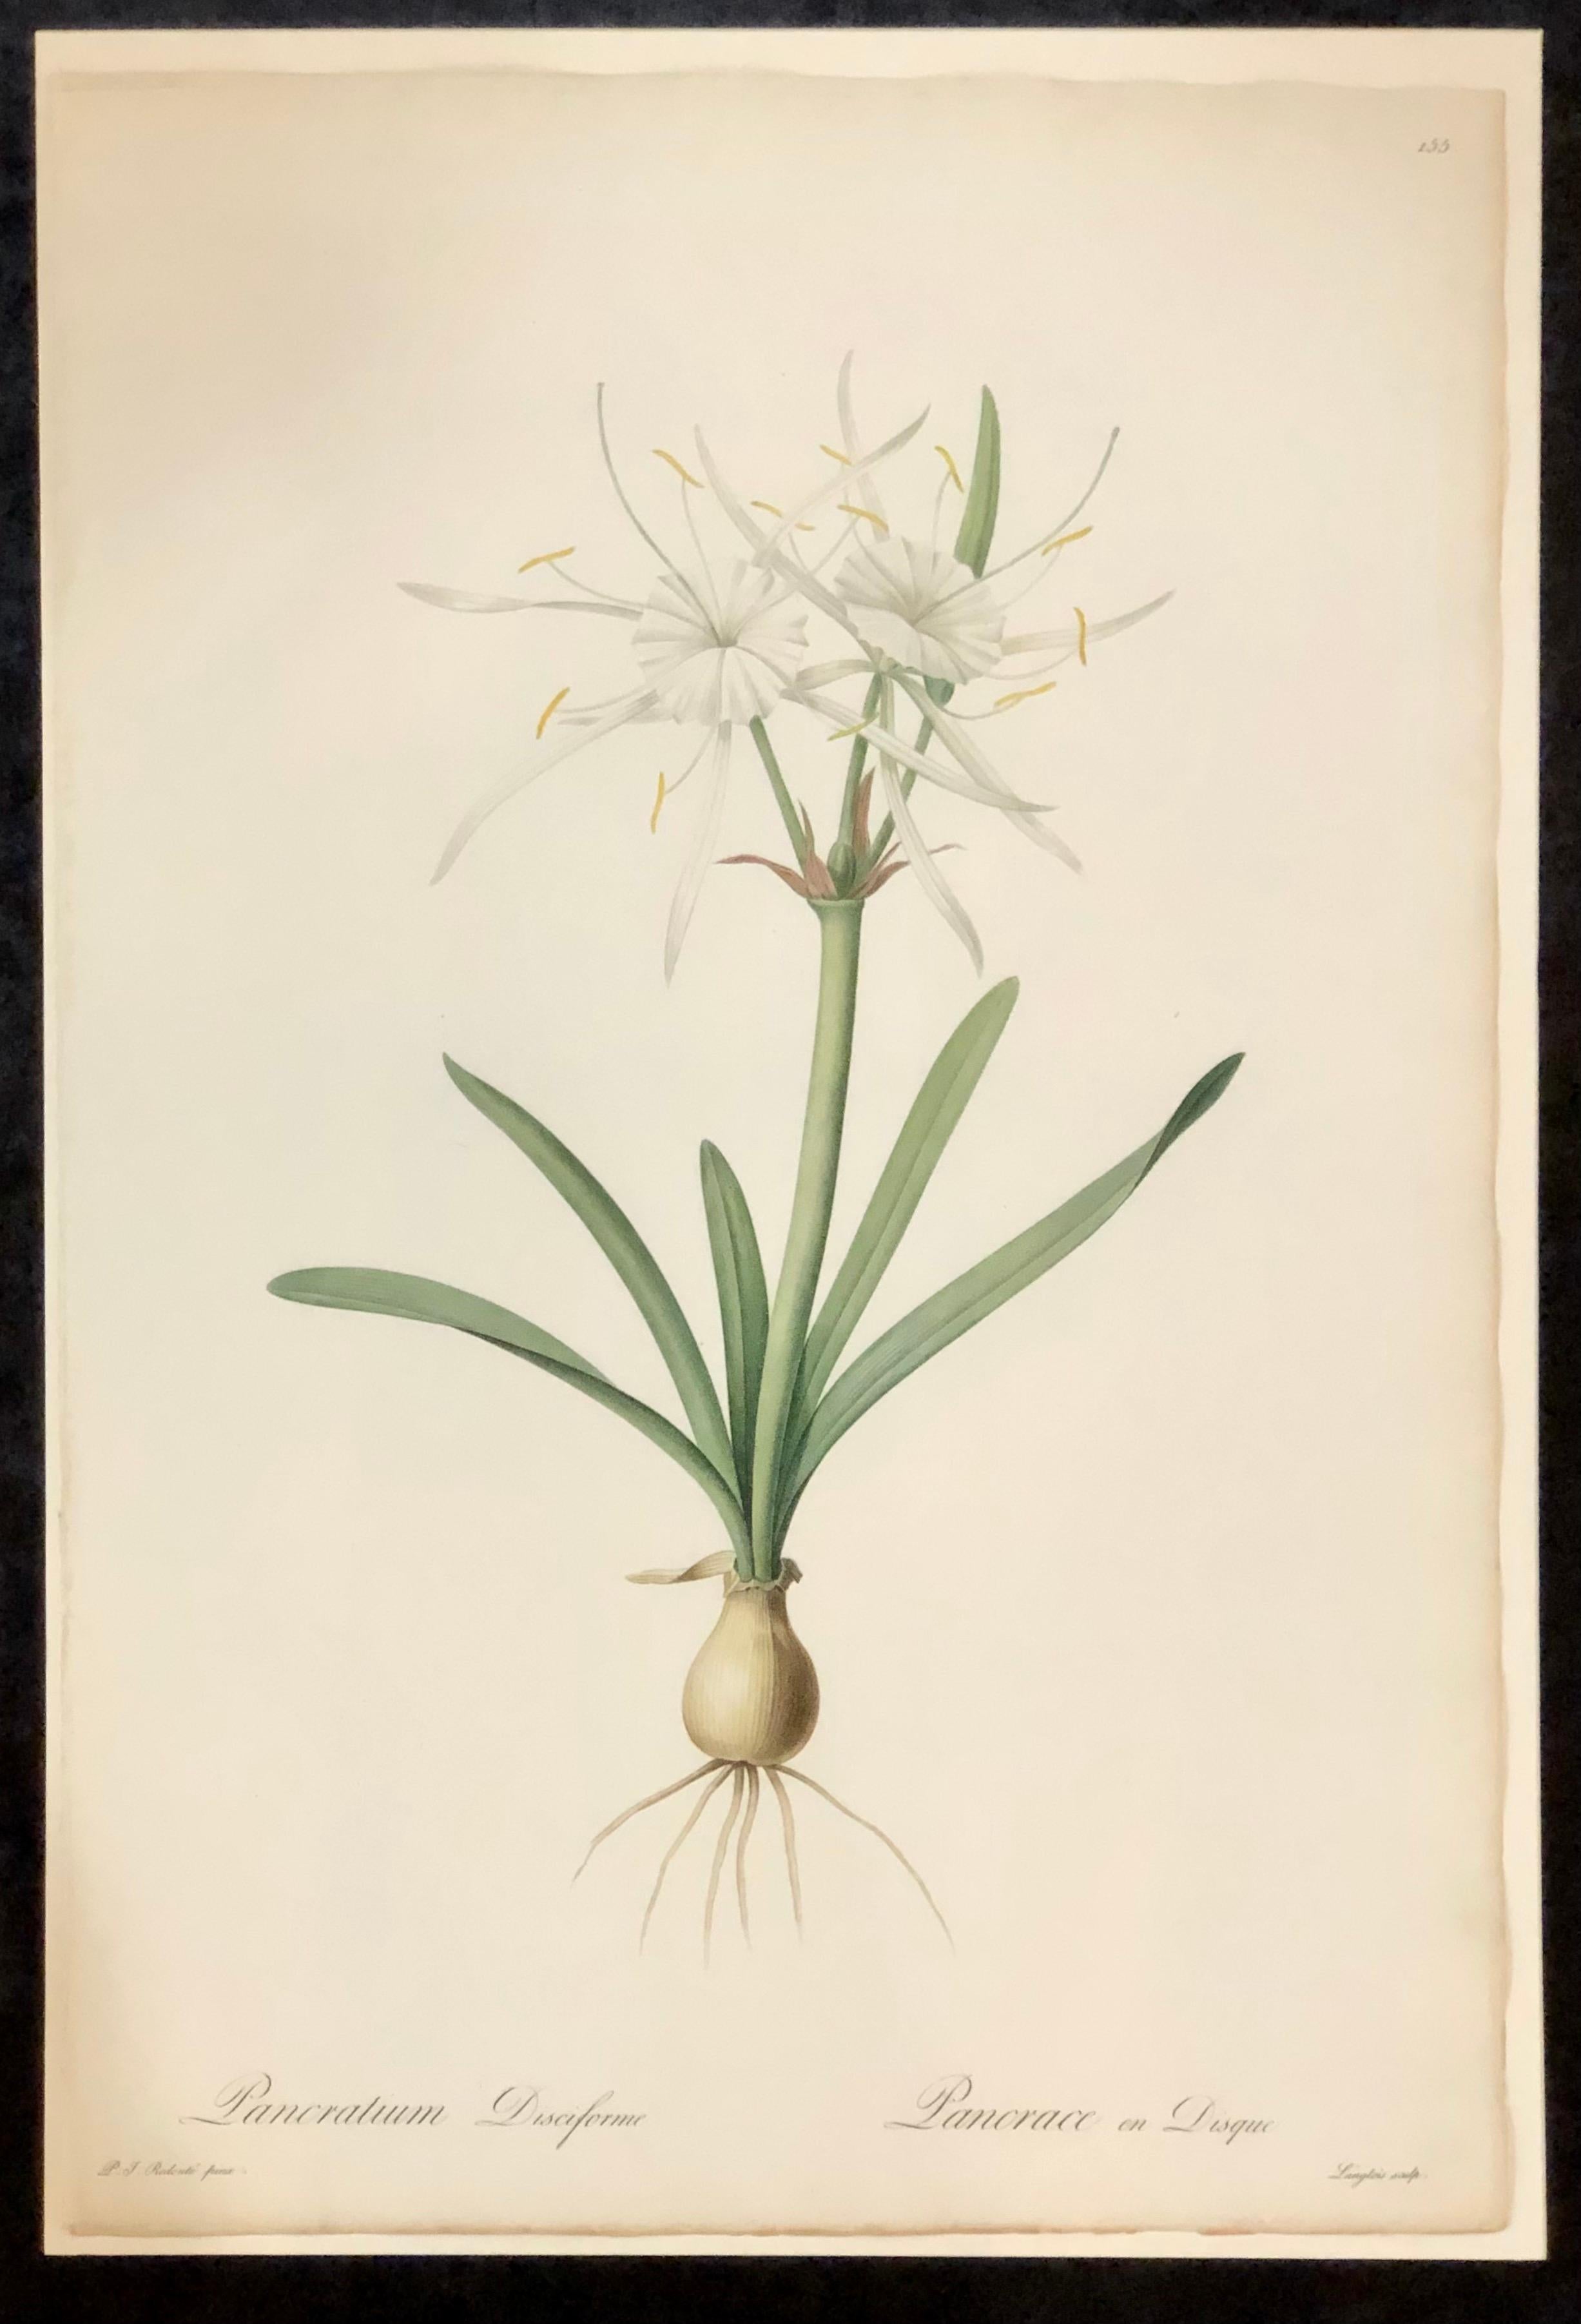 French Pancratium Disciforme Hand Colored Engraving Signed P.J. Redoute & Numbered